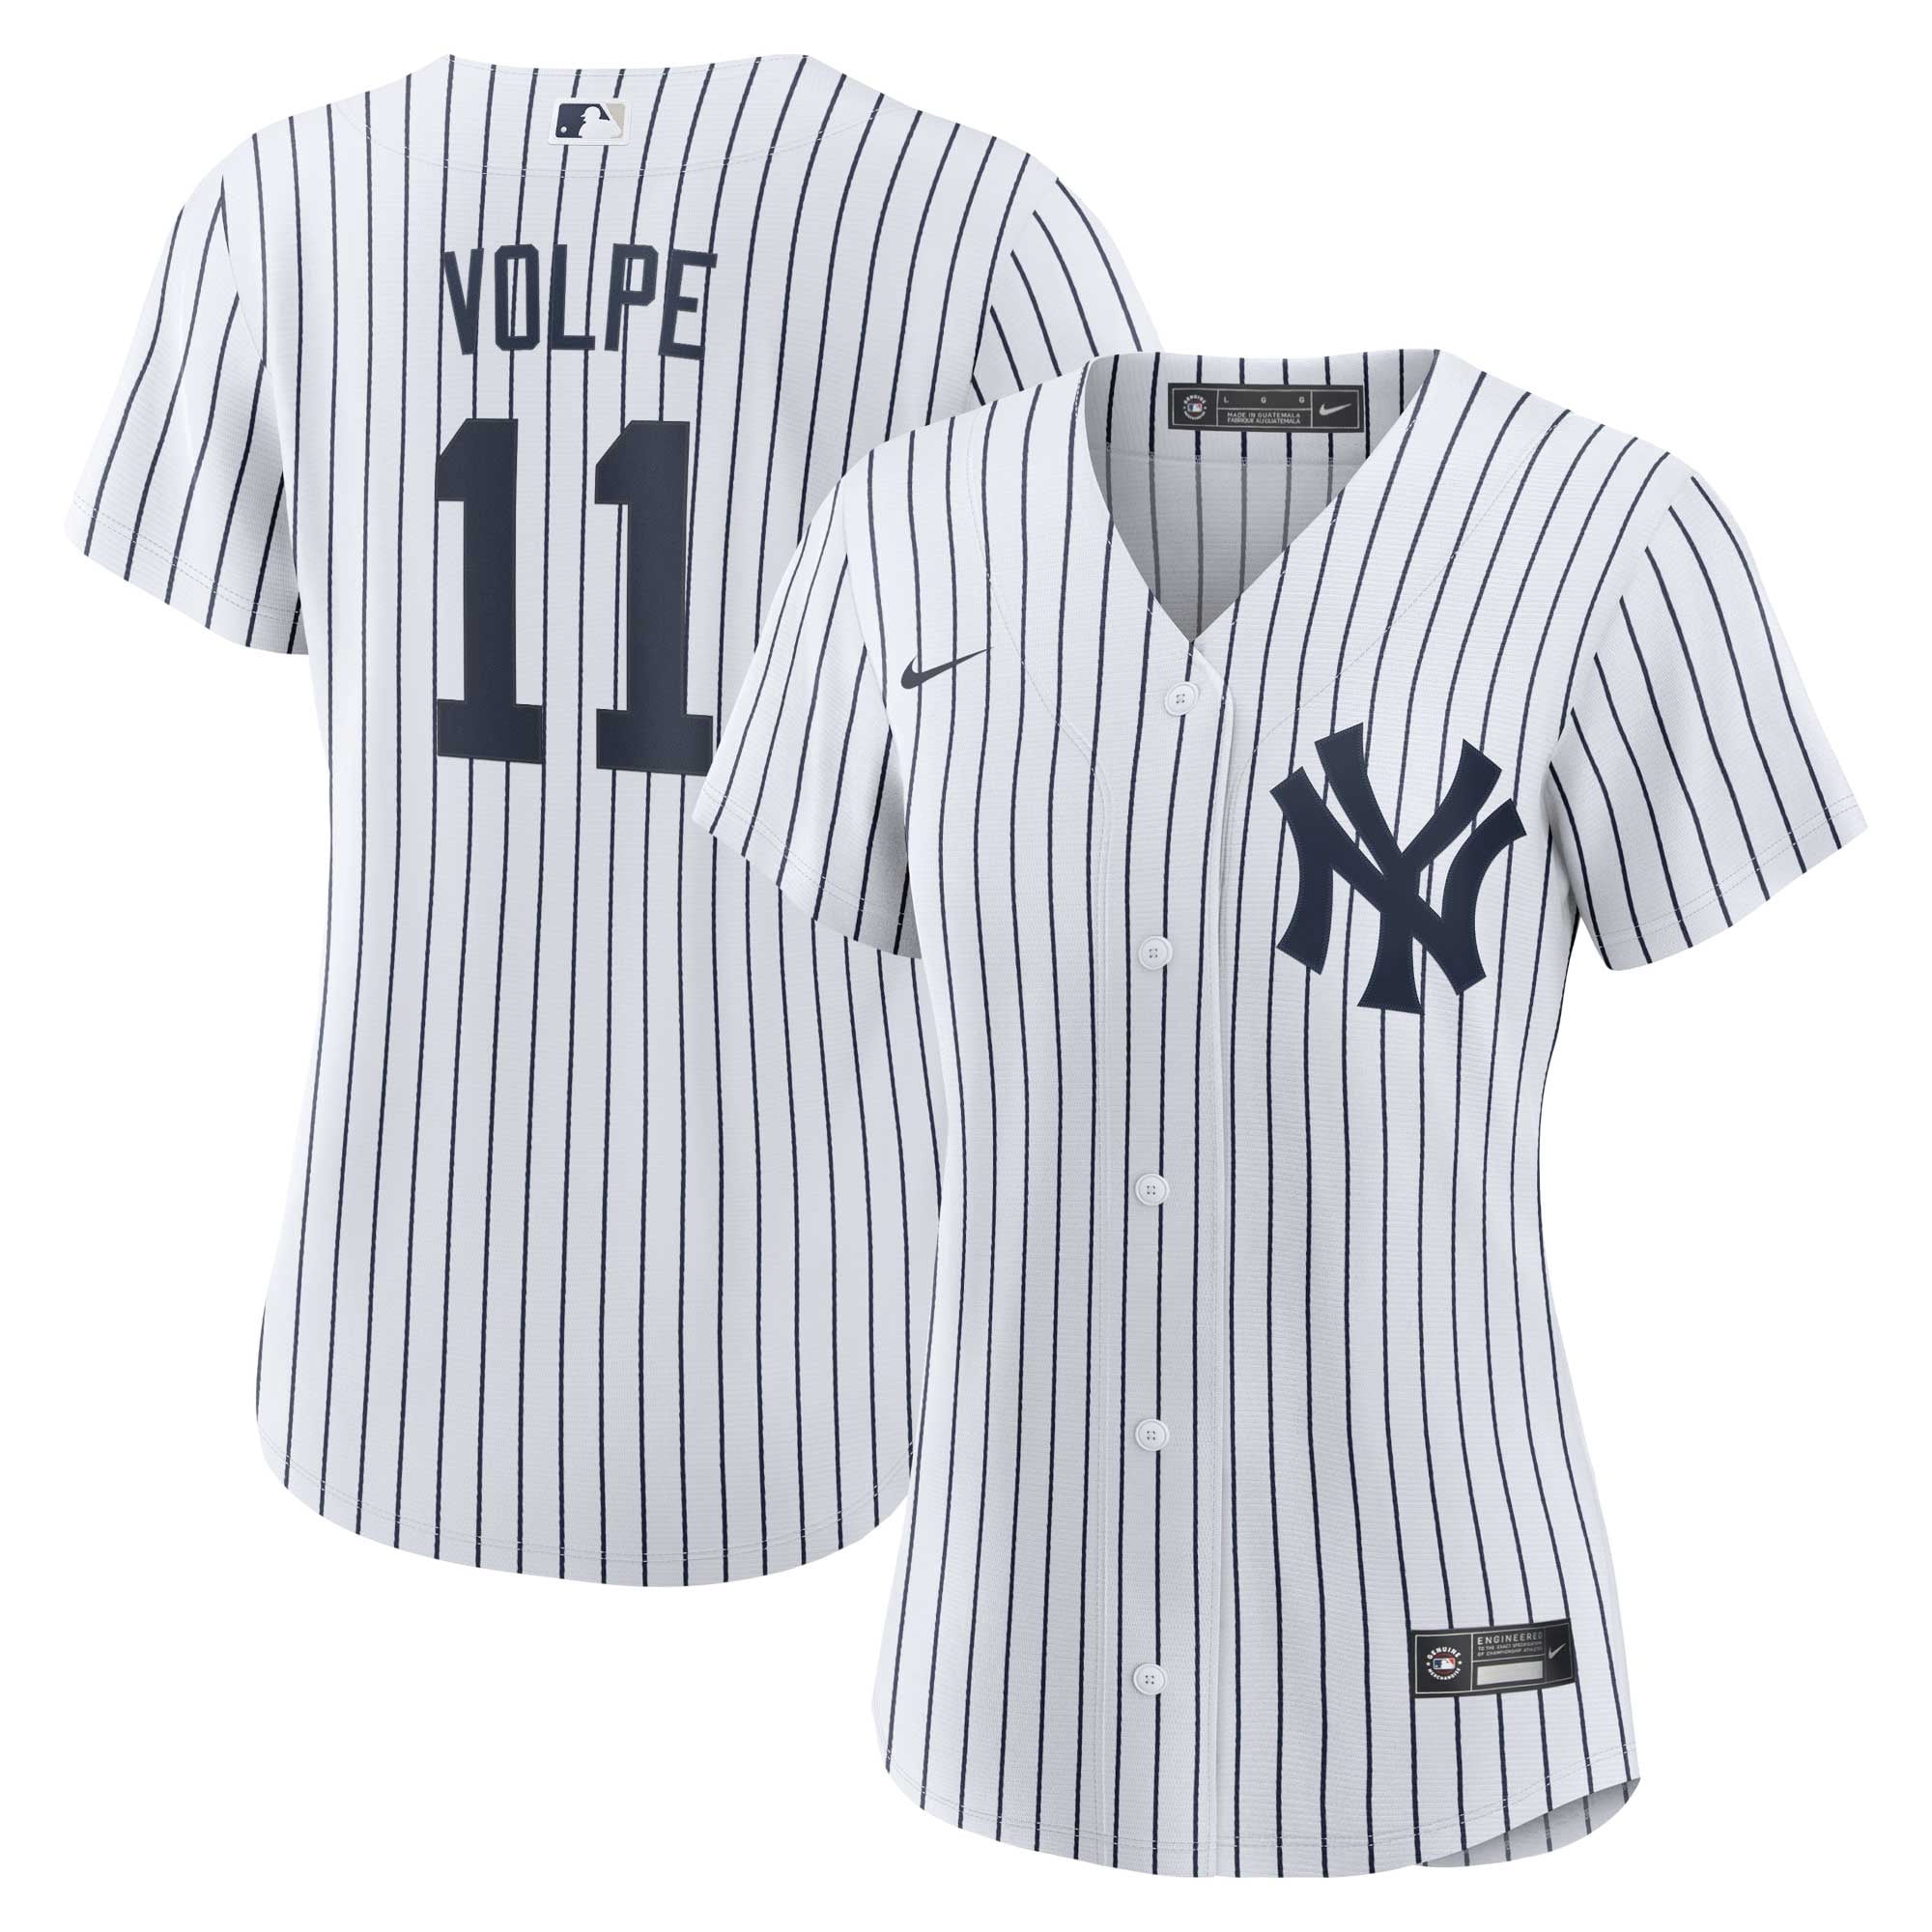 anthony volpe jersey number